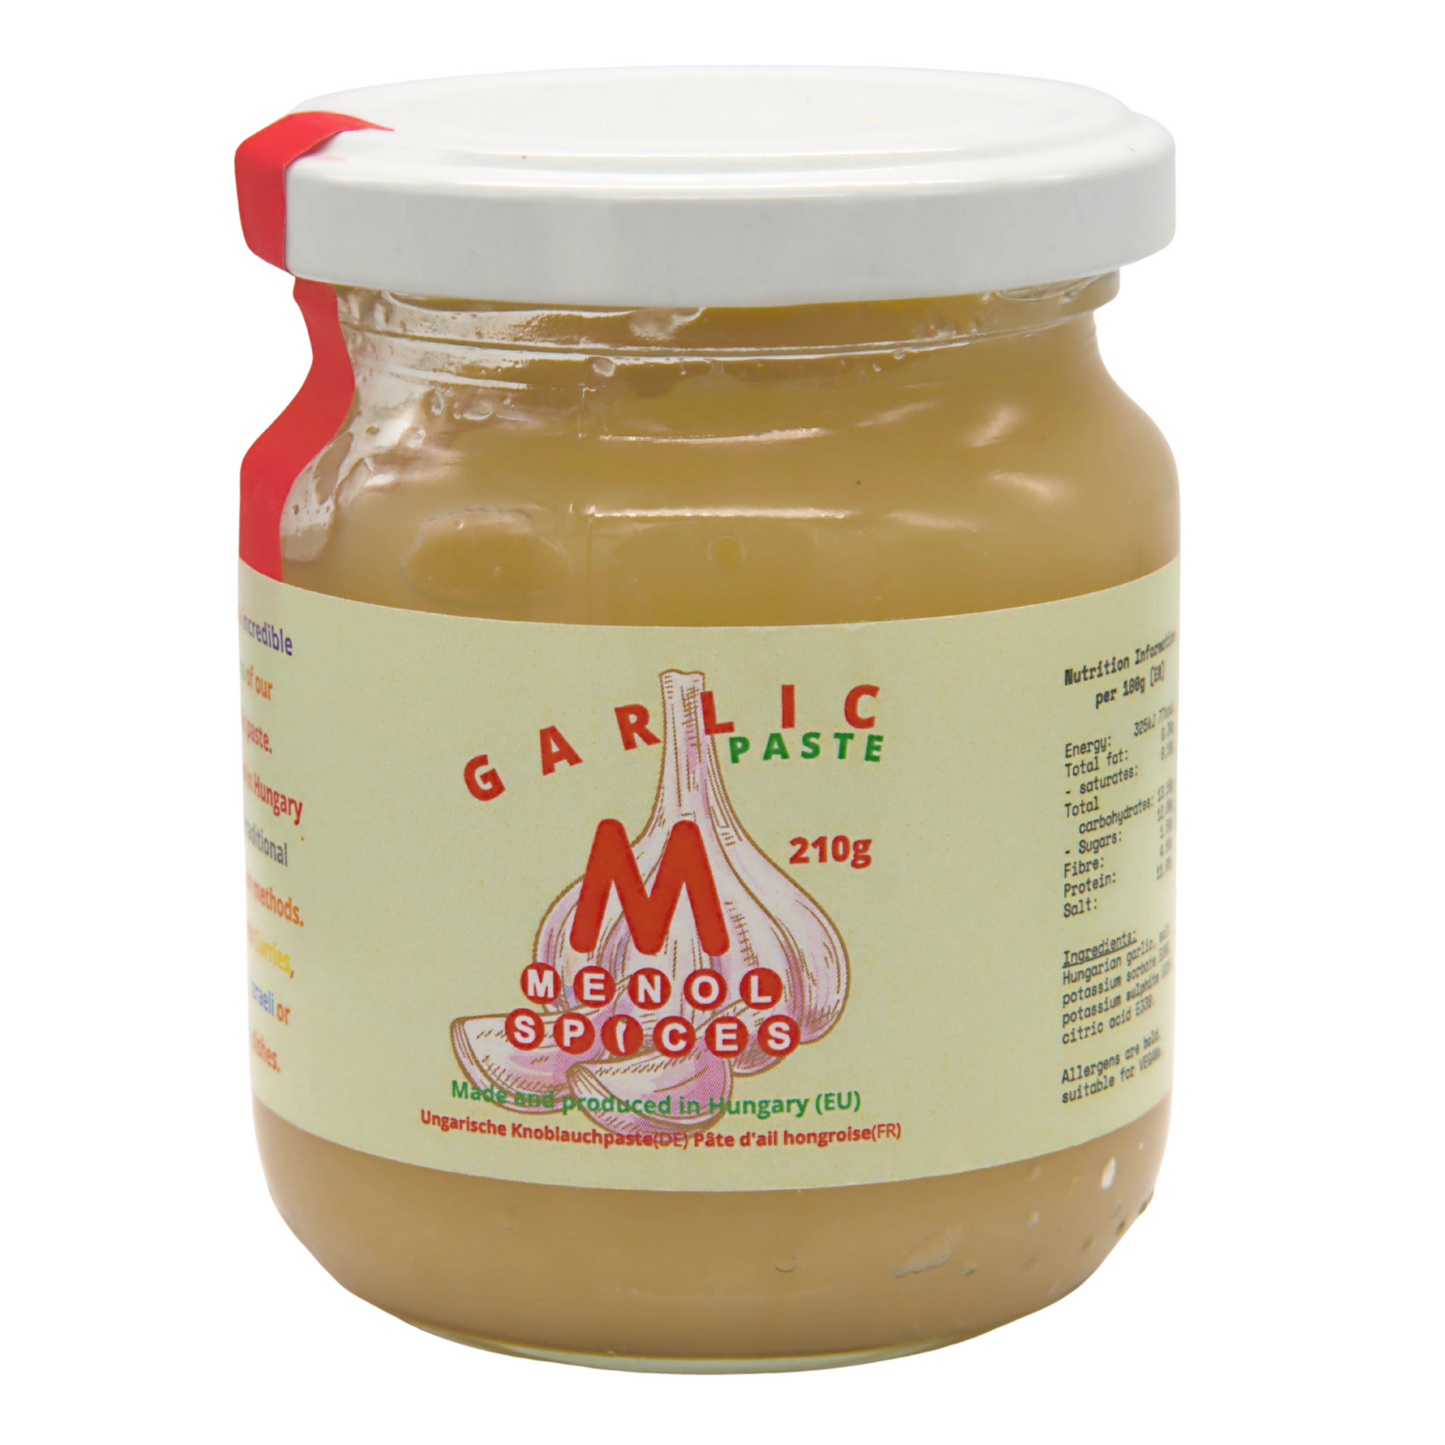 Menol Spices Garlic Paste 210g, Produced in EU (Hungary), Garlic Puree, Gives Fresh Garlic Flavour to Your Gourmet Food